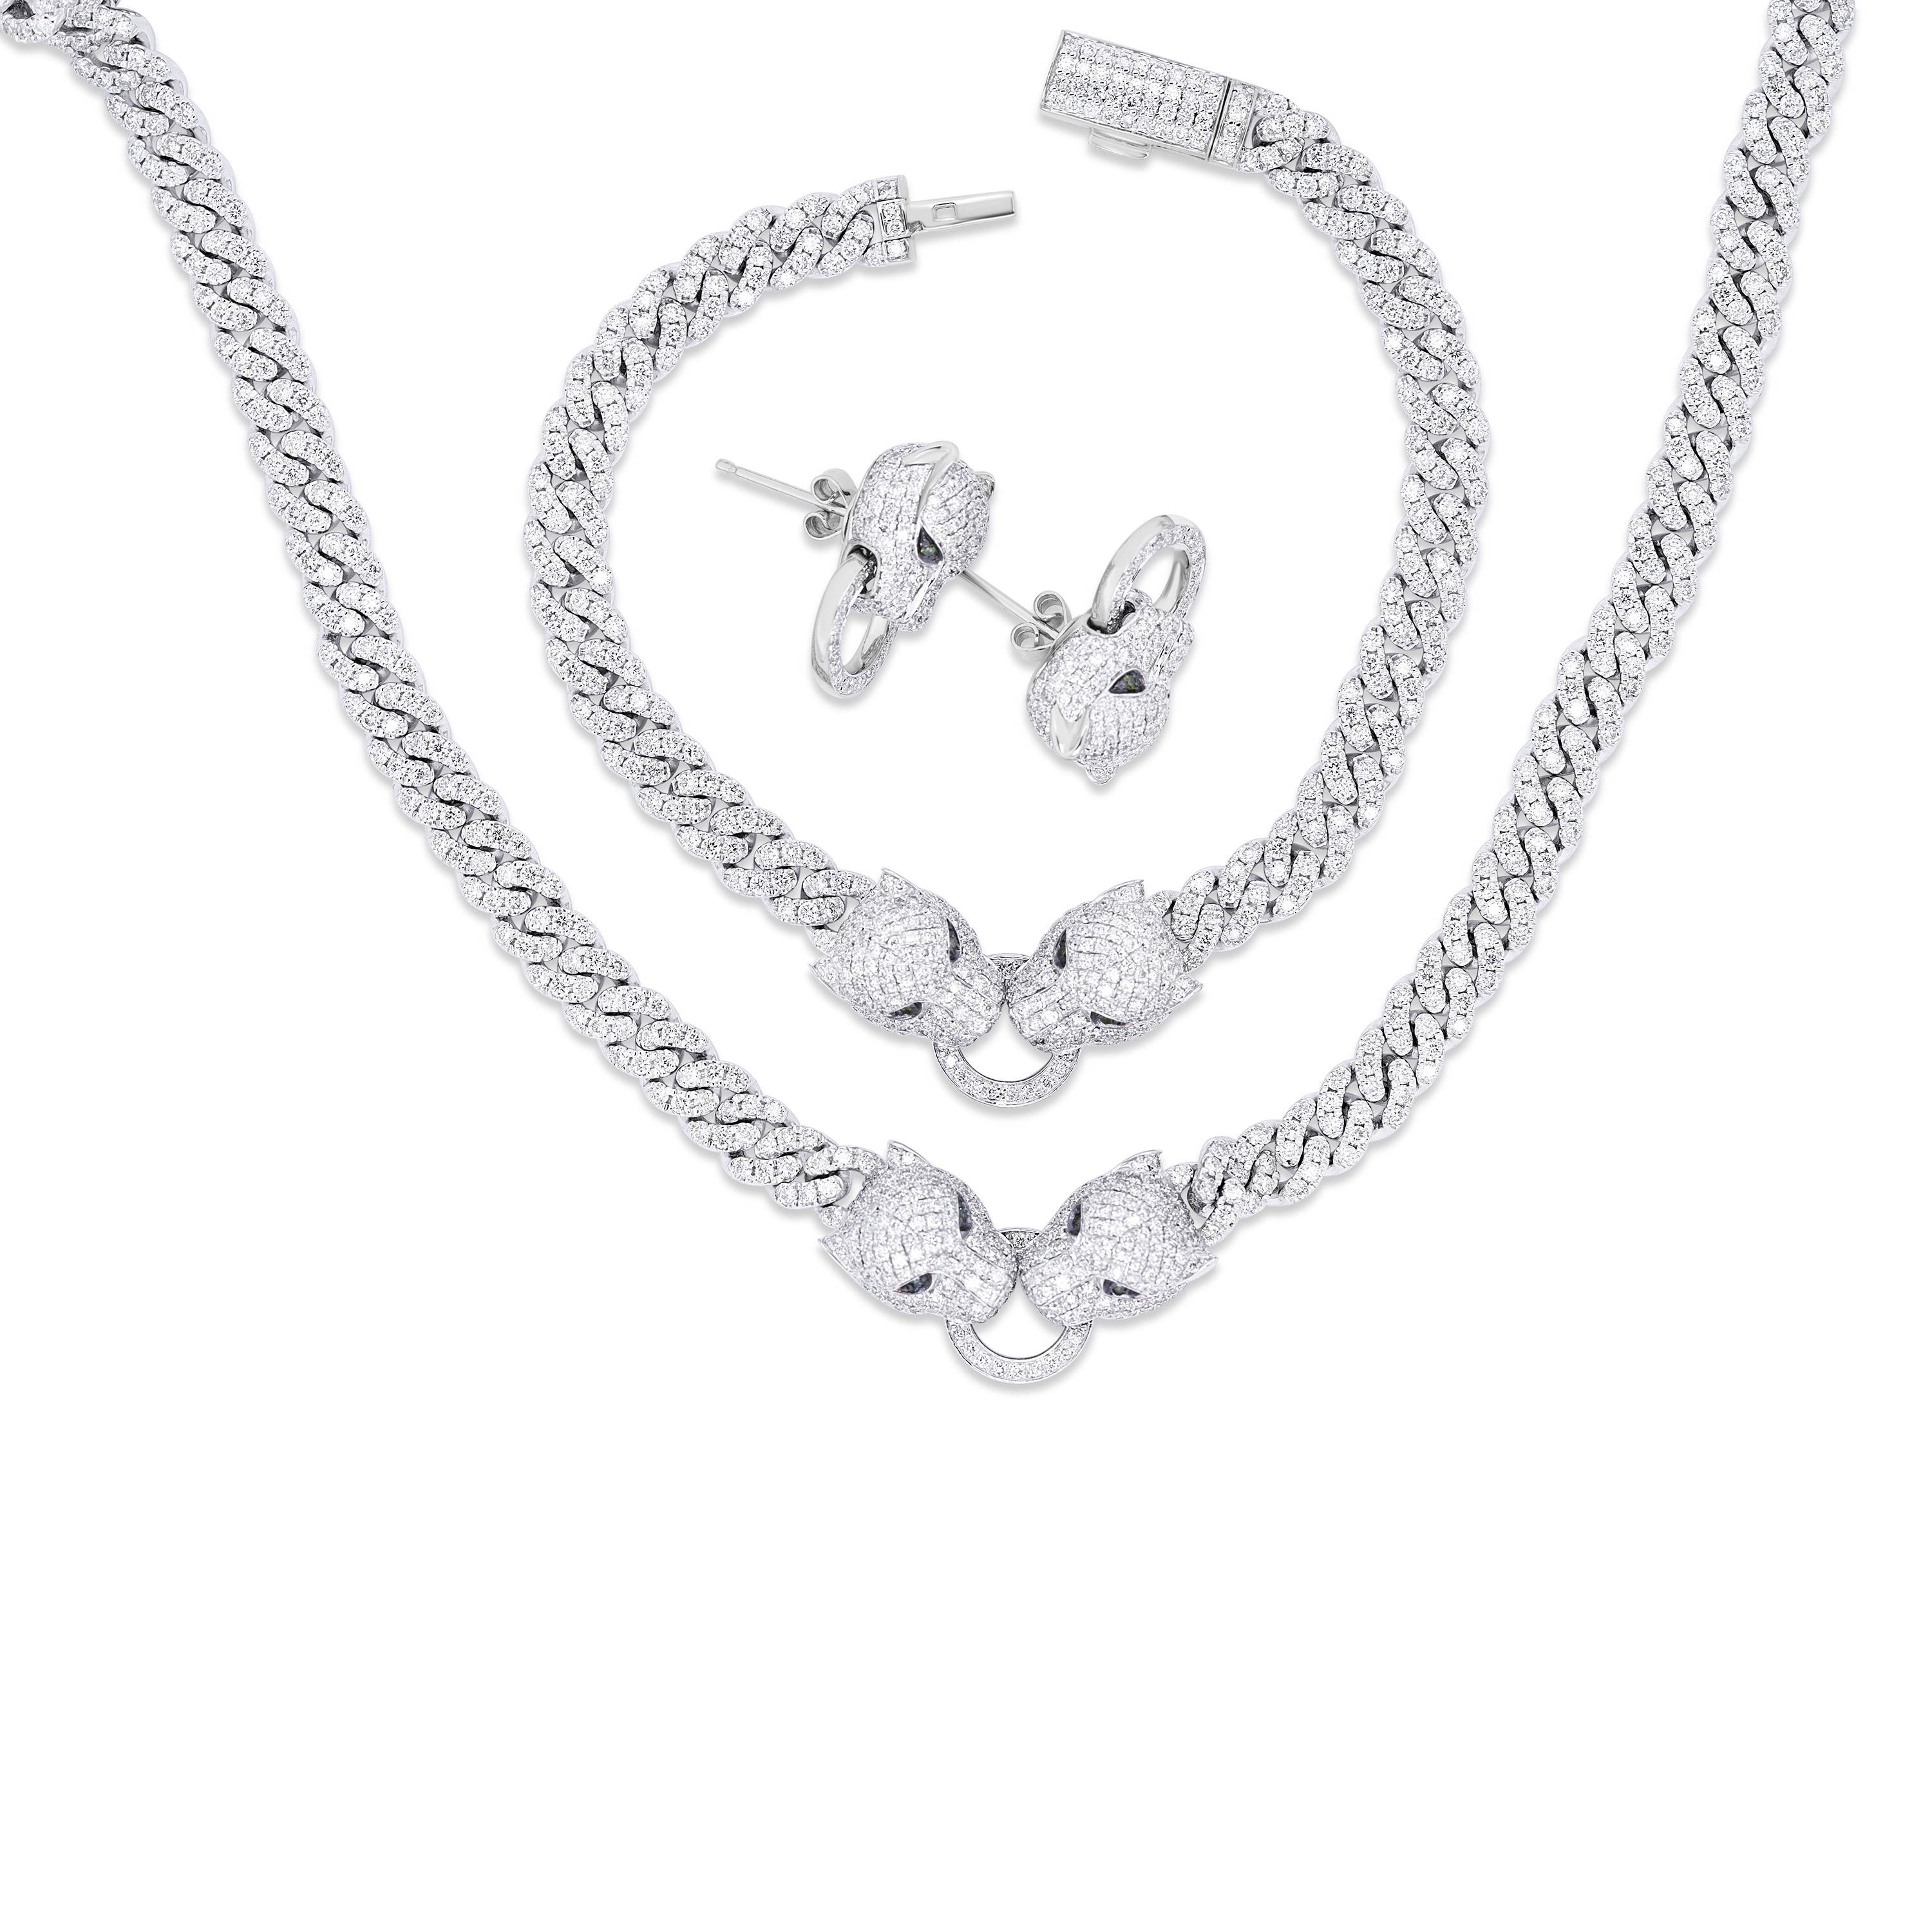 Diamond Panther Complete Necklace/Bracelet/Earrings set 3.70 ct. 14K White Gold